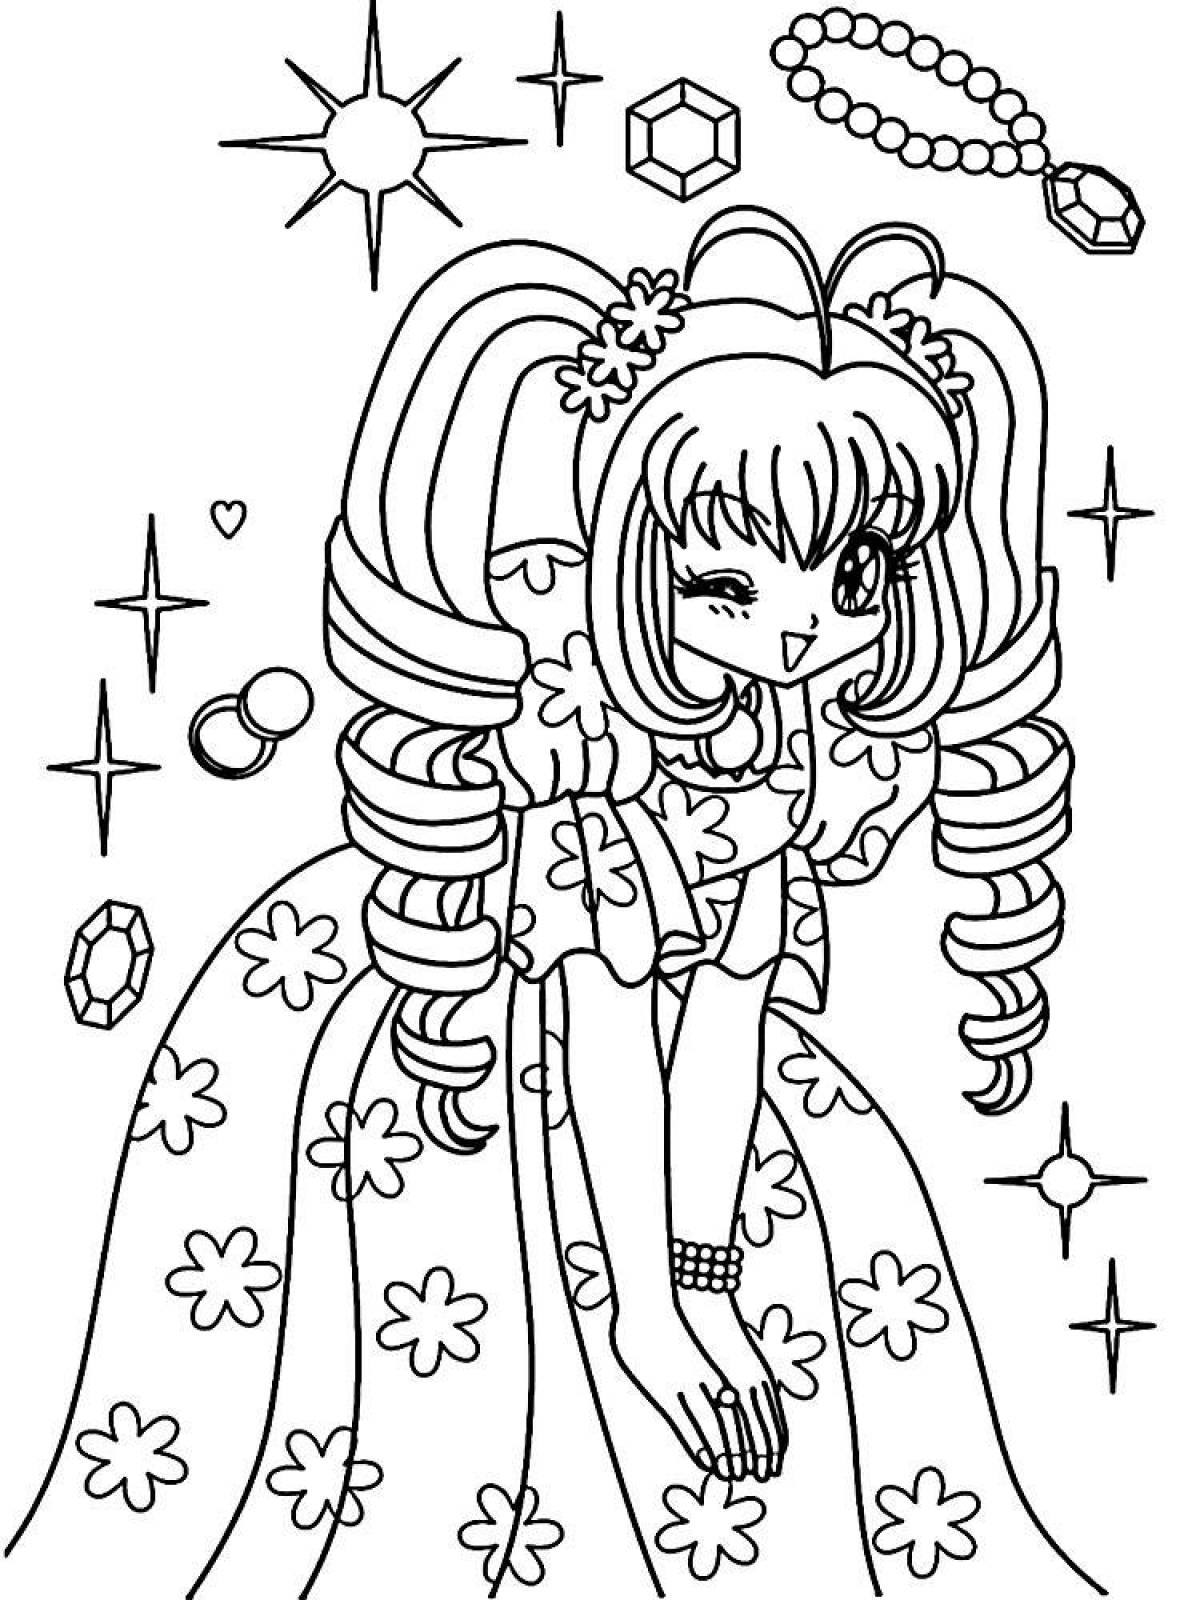 Tempting 12 years old coloring pages